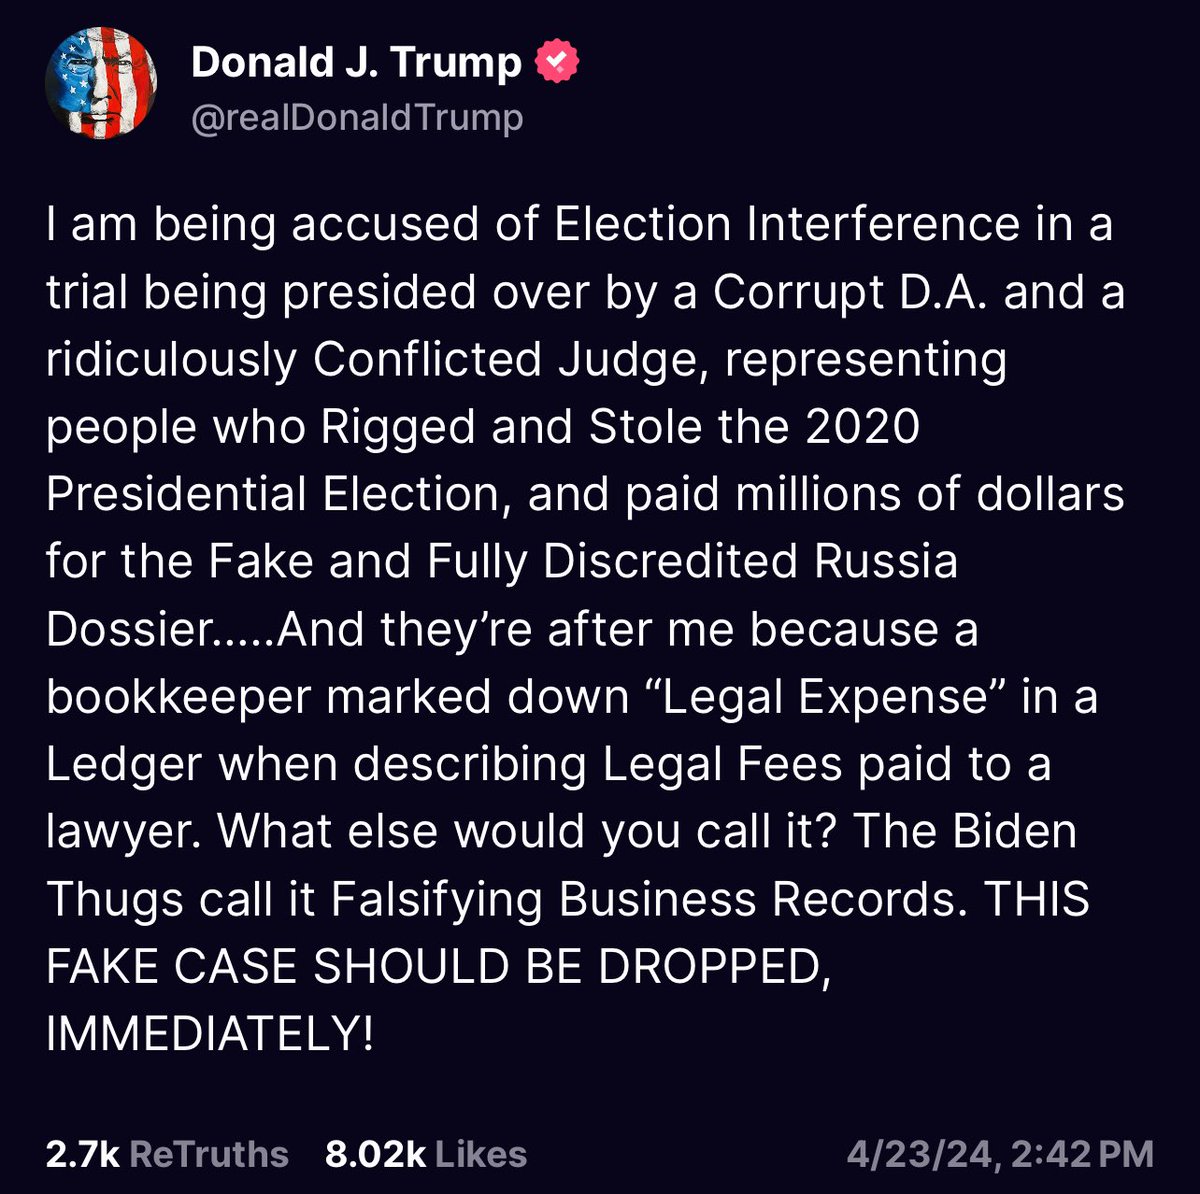 President Trump was indicted because a bookkeeper marked down “legal expense” when describing legal fees paid to a lawyer? 

That’s like getting a ticket for stopping at a red light…